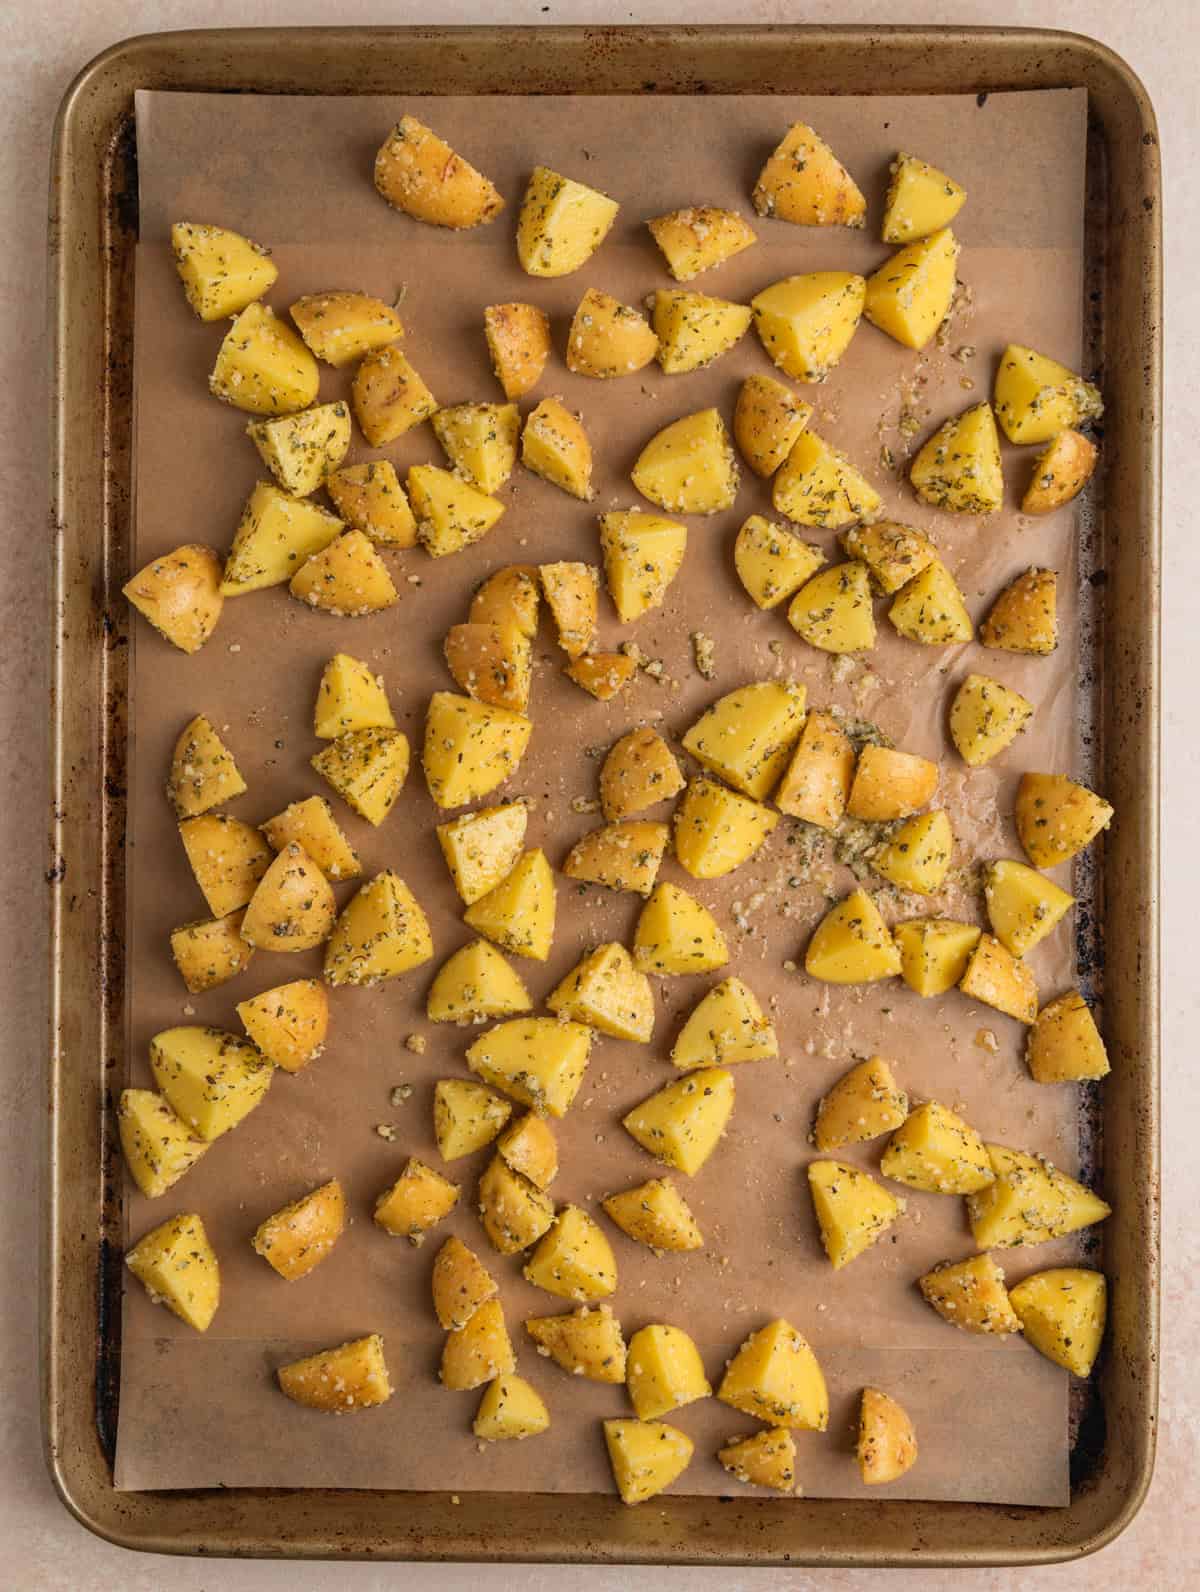 Parmesan, oil and herbed potato pieces lined on sheet pan.